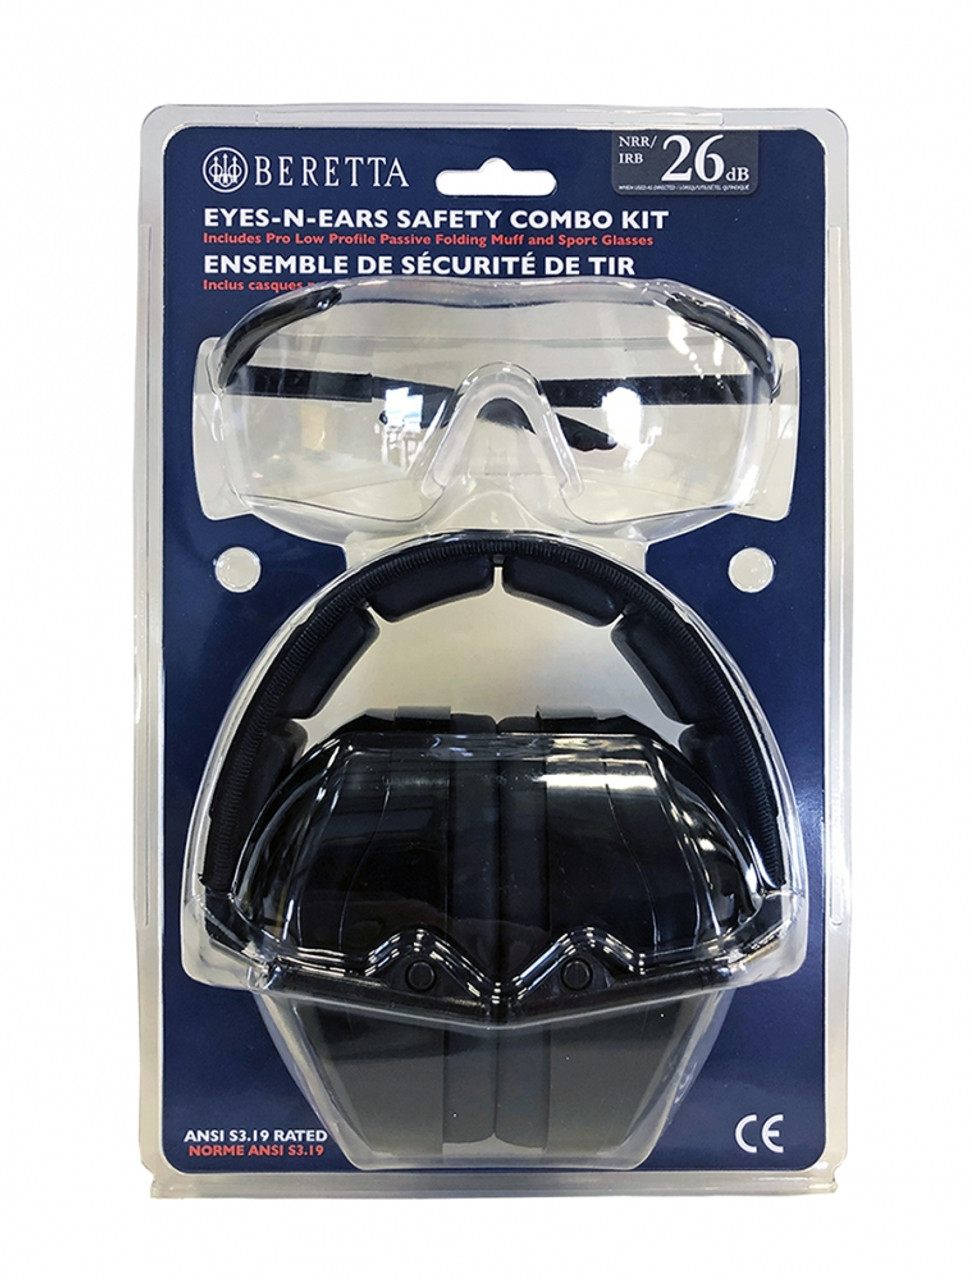 The Beretta® Eyes-N-Ears Safety Combo Kit includes one pair of clear safety glasses and one pair of Beretta low-profile passive muffs.